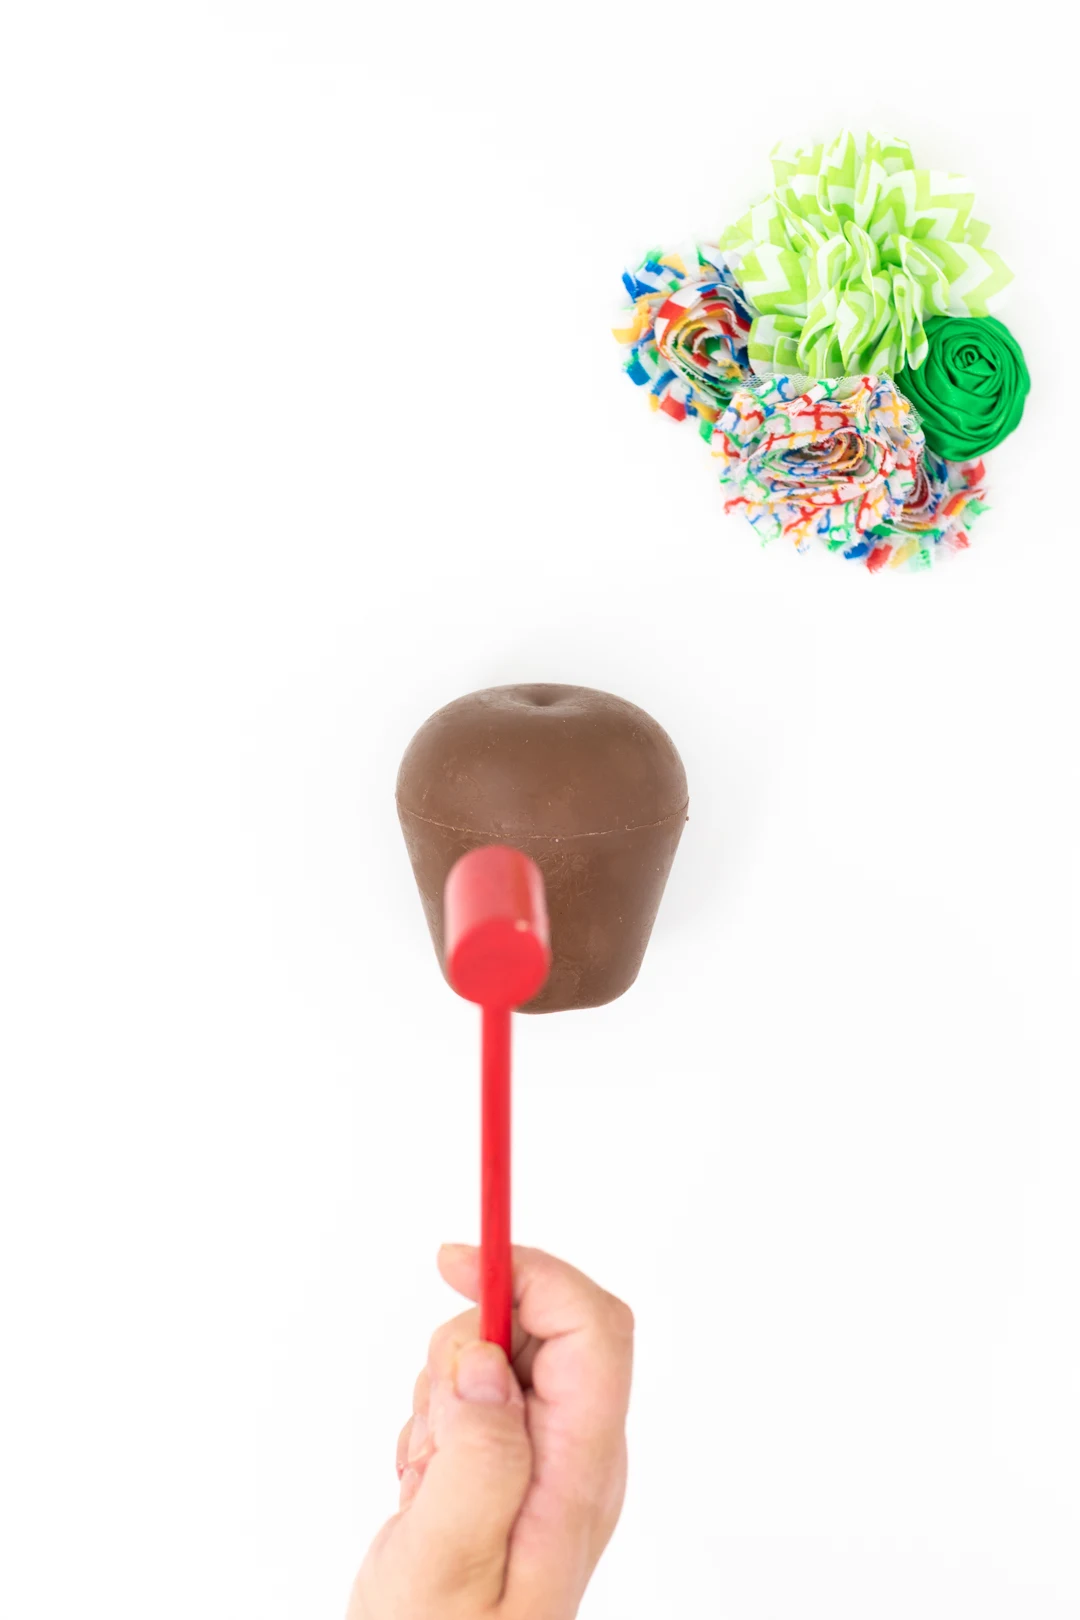 mini mallet being used to smash a pinata style chocolate apple filled with sprinkles and small candies